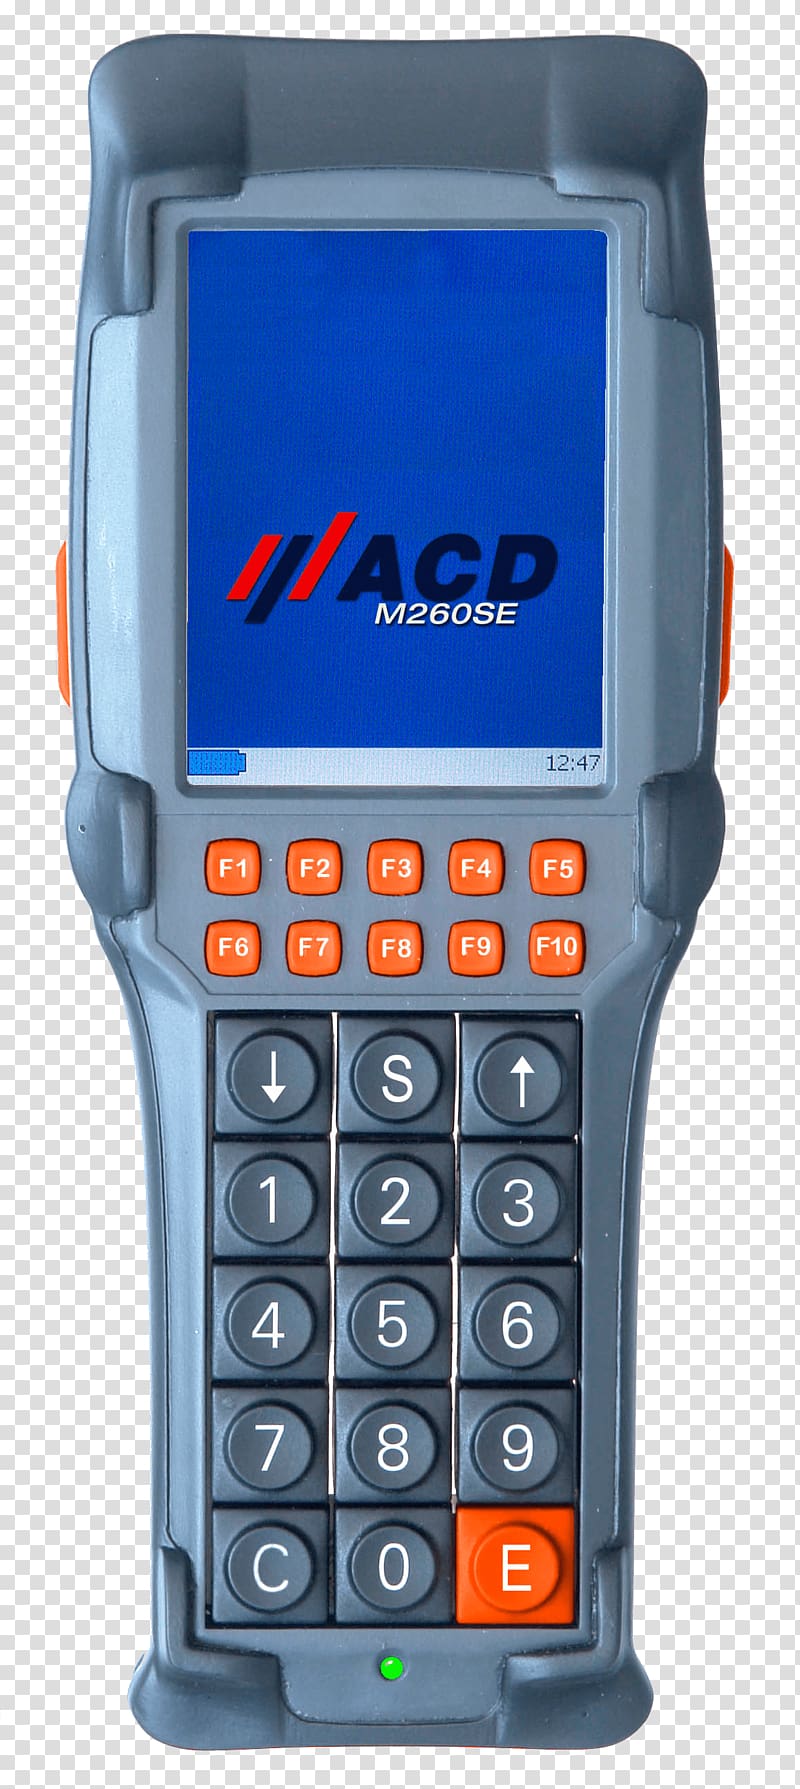 Telephony Computer hardware Computer terminal Handheld Devices Automatic call distributor, mobile terminal transparent background PNG clipart